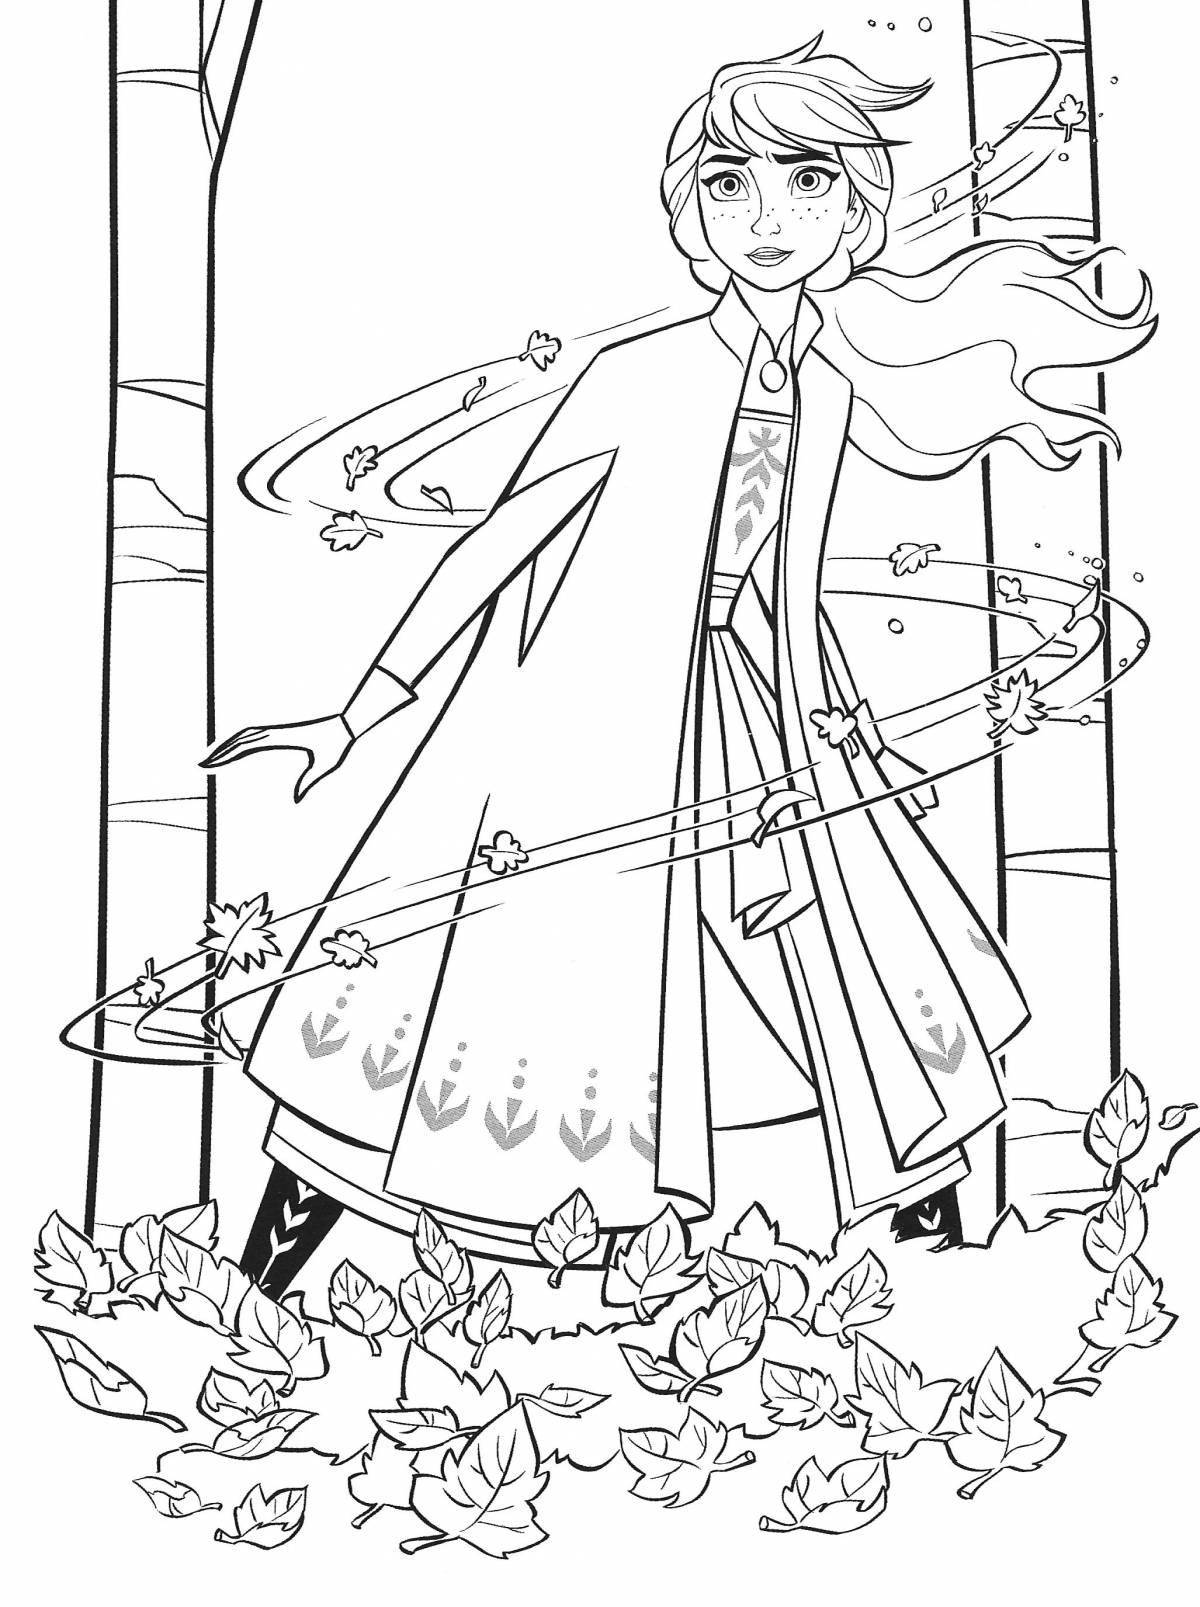 Refreshing coloring book cold heart 2 for girls